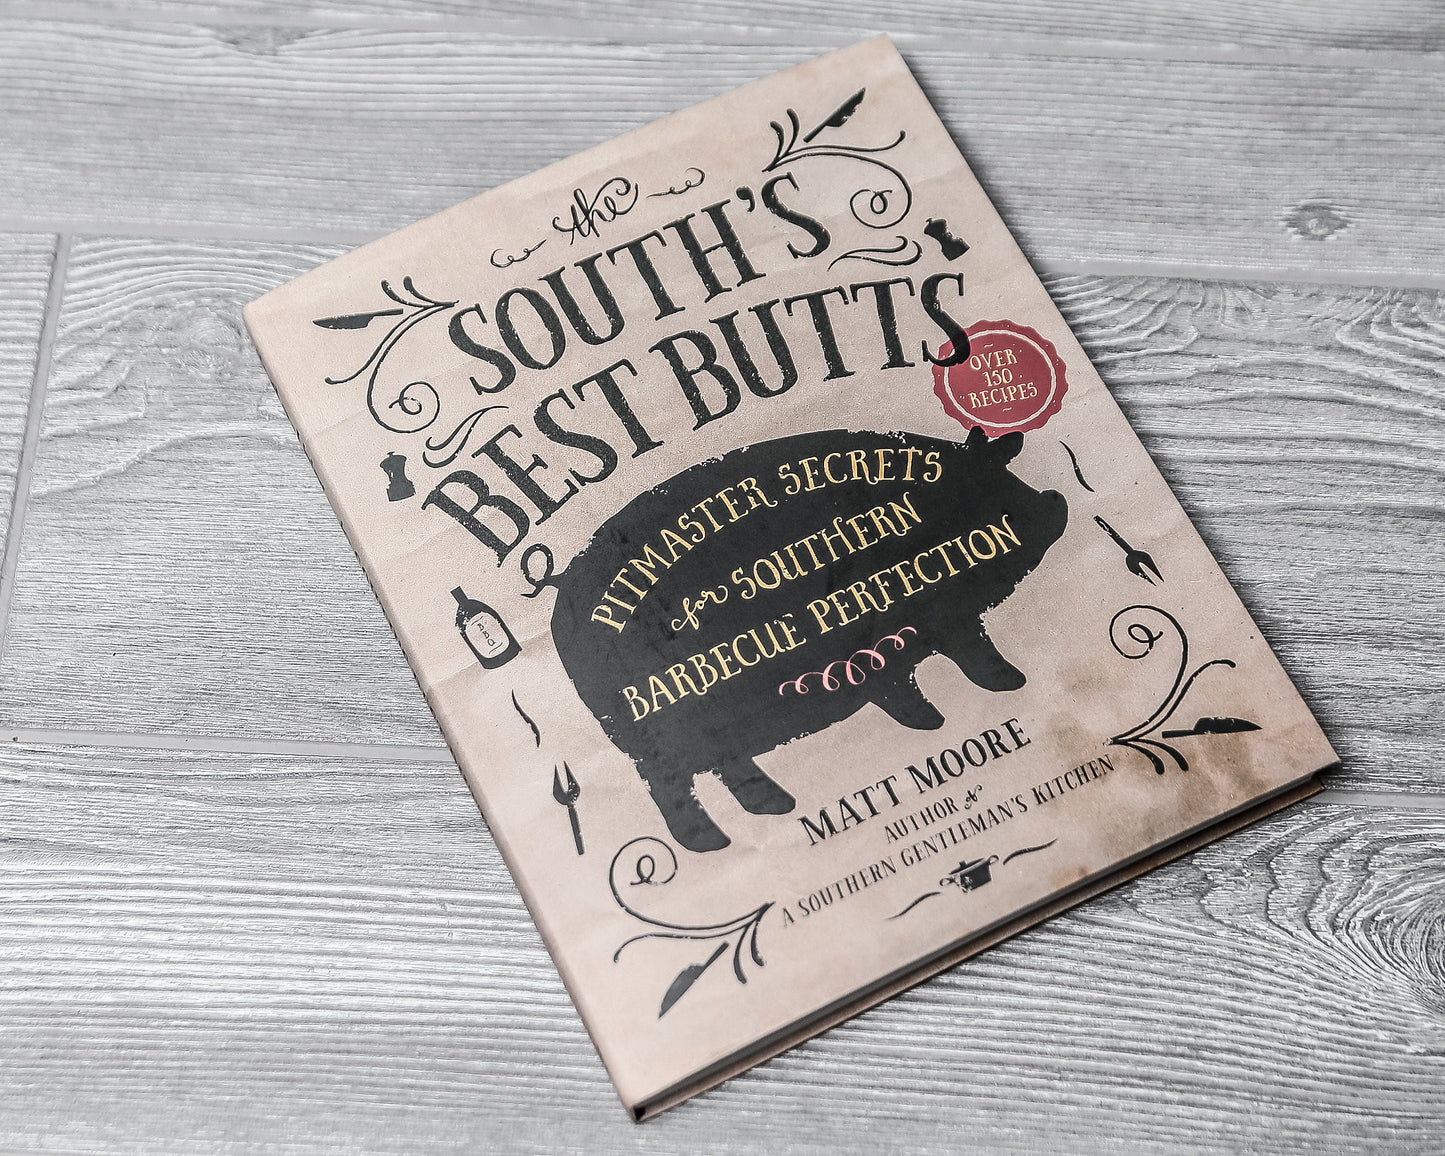 EastWest Bottlers - The South's Best Butts